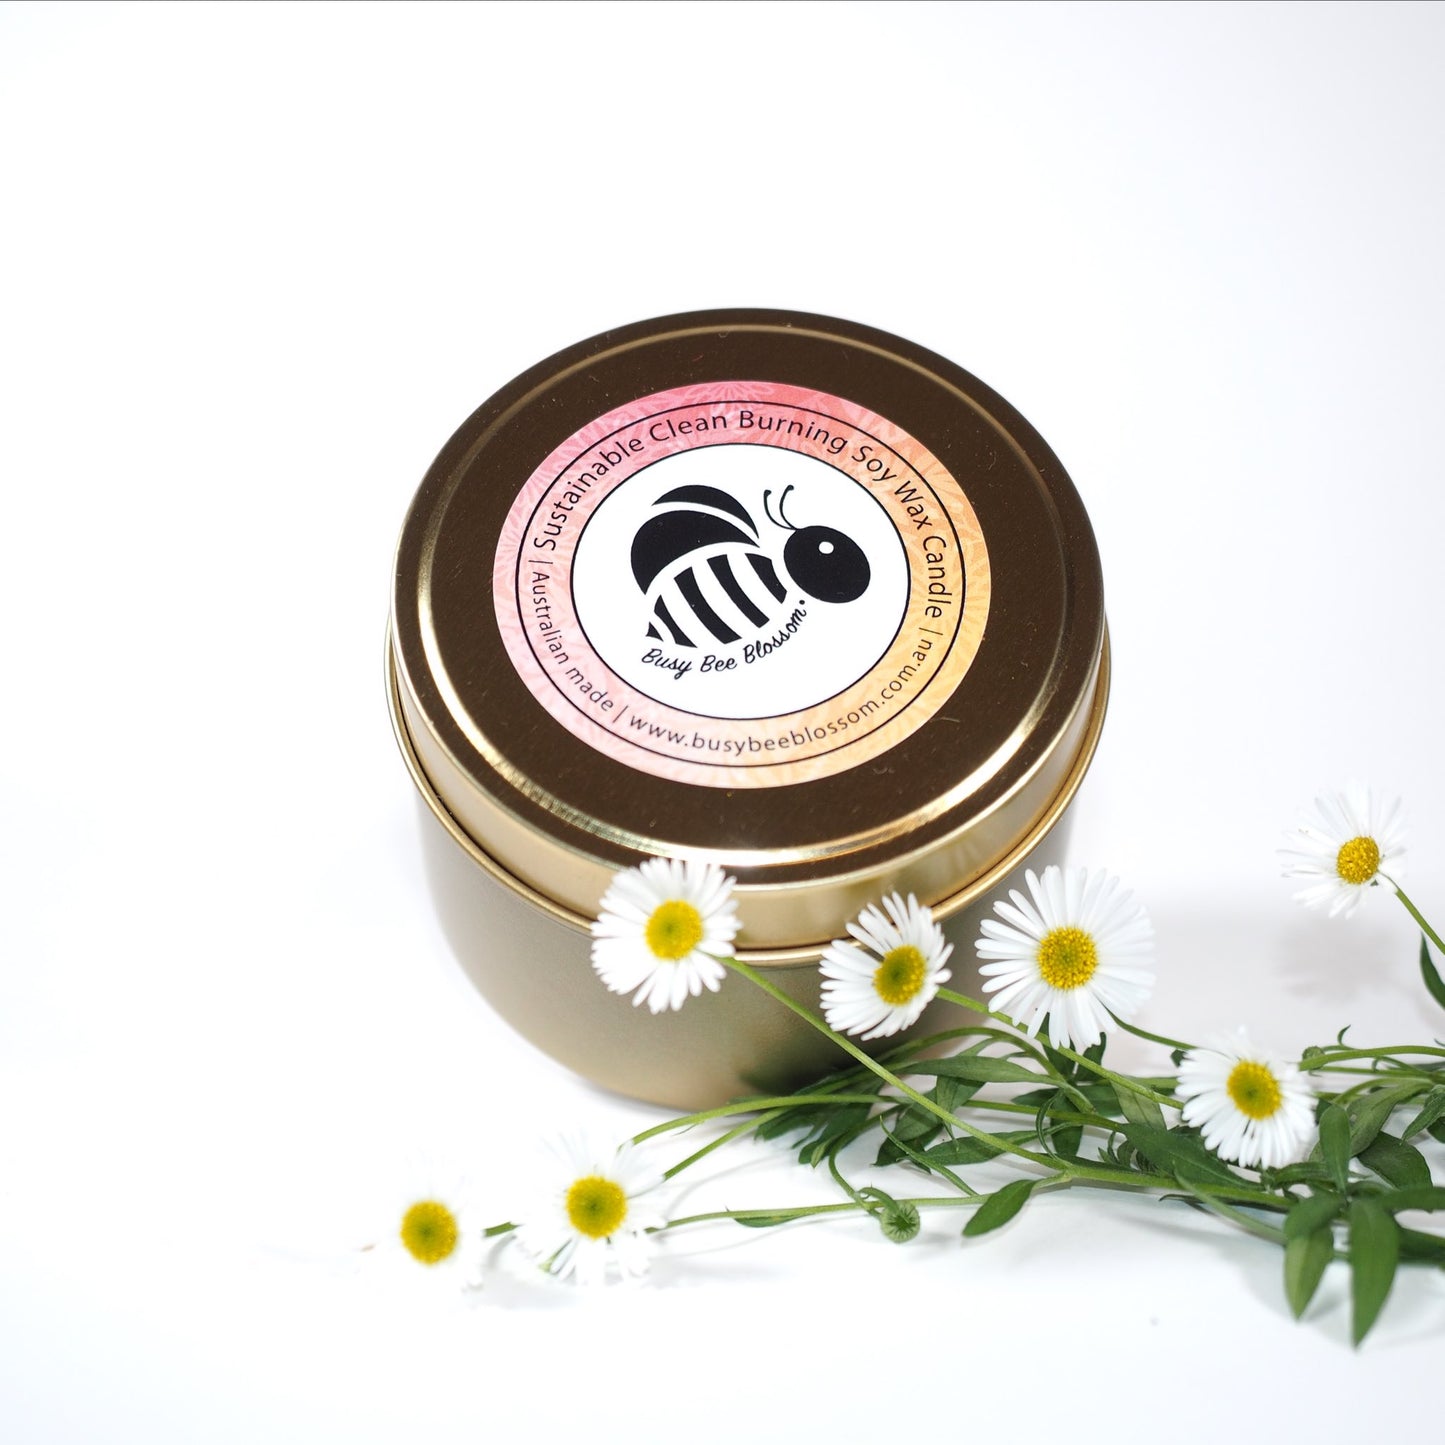 Busy Bee Blossom Australian made gold travel tin in coconut and soy wax scented in Bergamot and Banksia